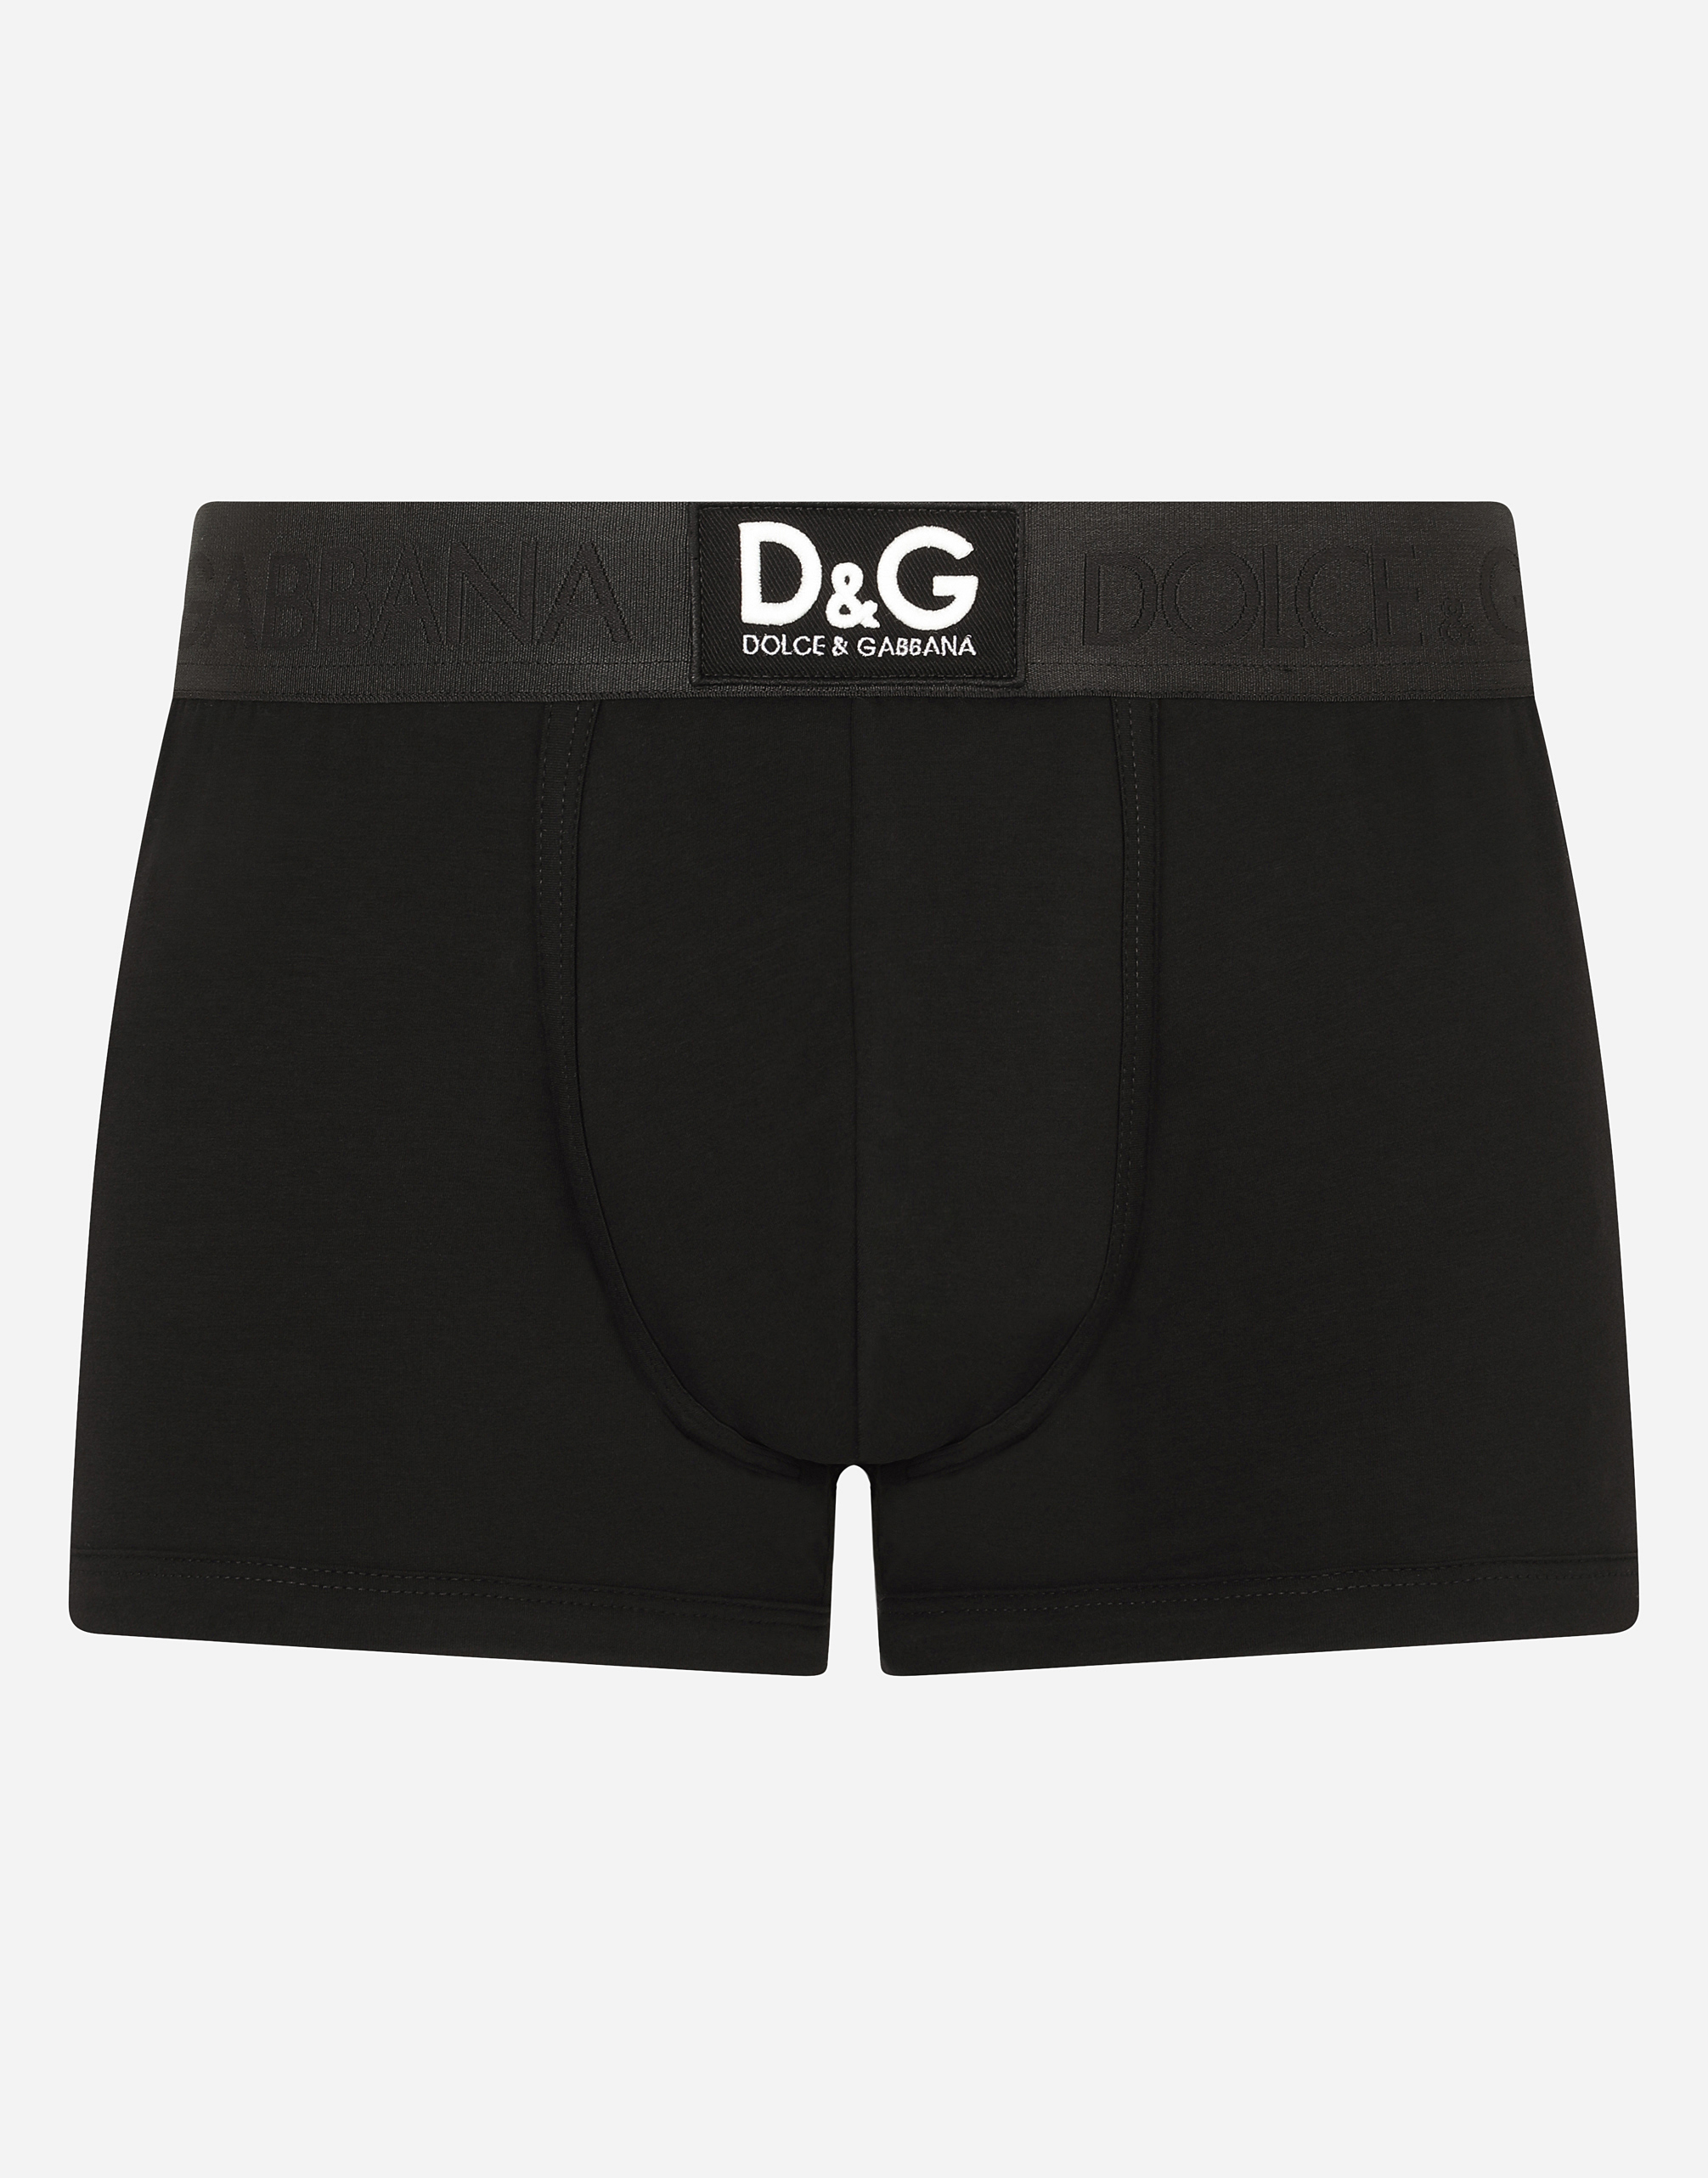 Two-way stretch cotton boxers with DG patch in Black